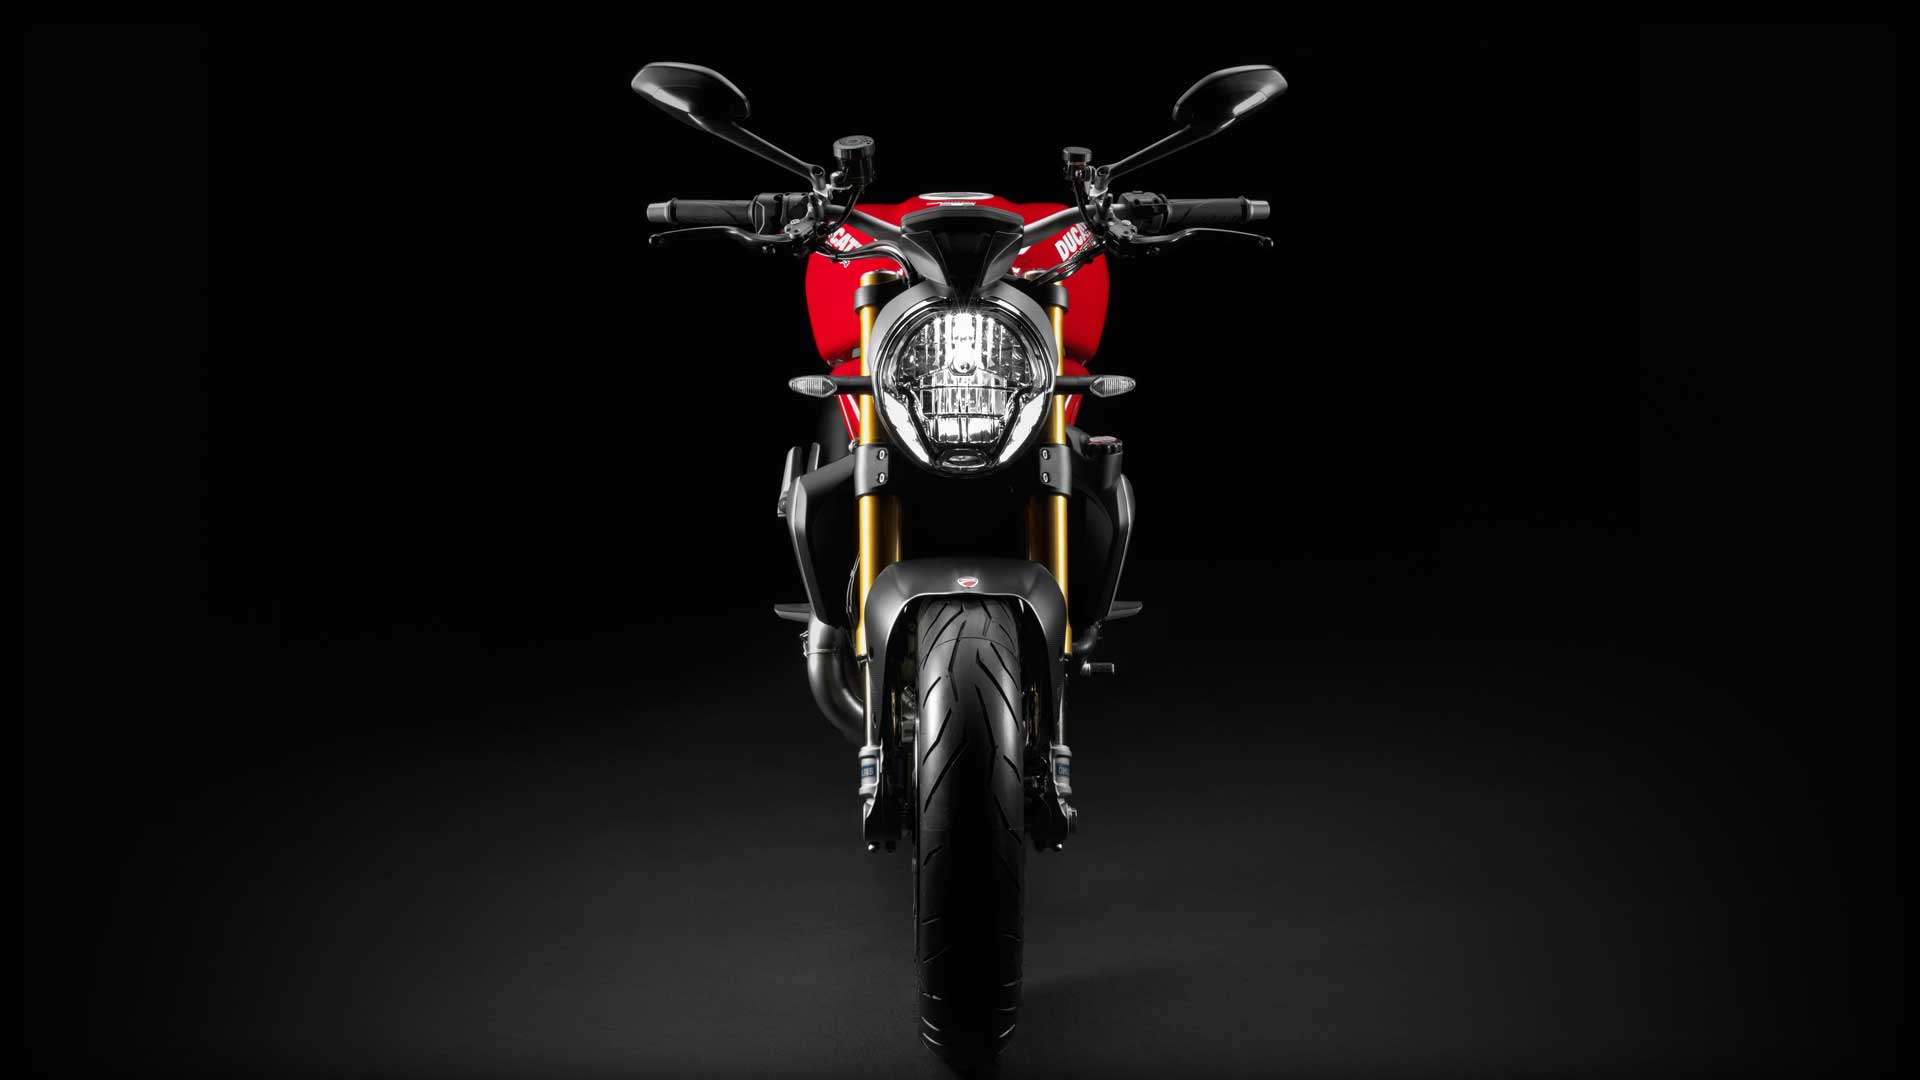 2014 Ducati Monster 1200 S Front View